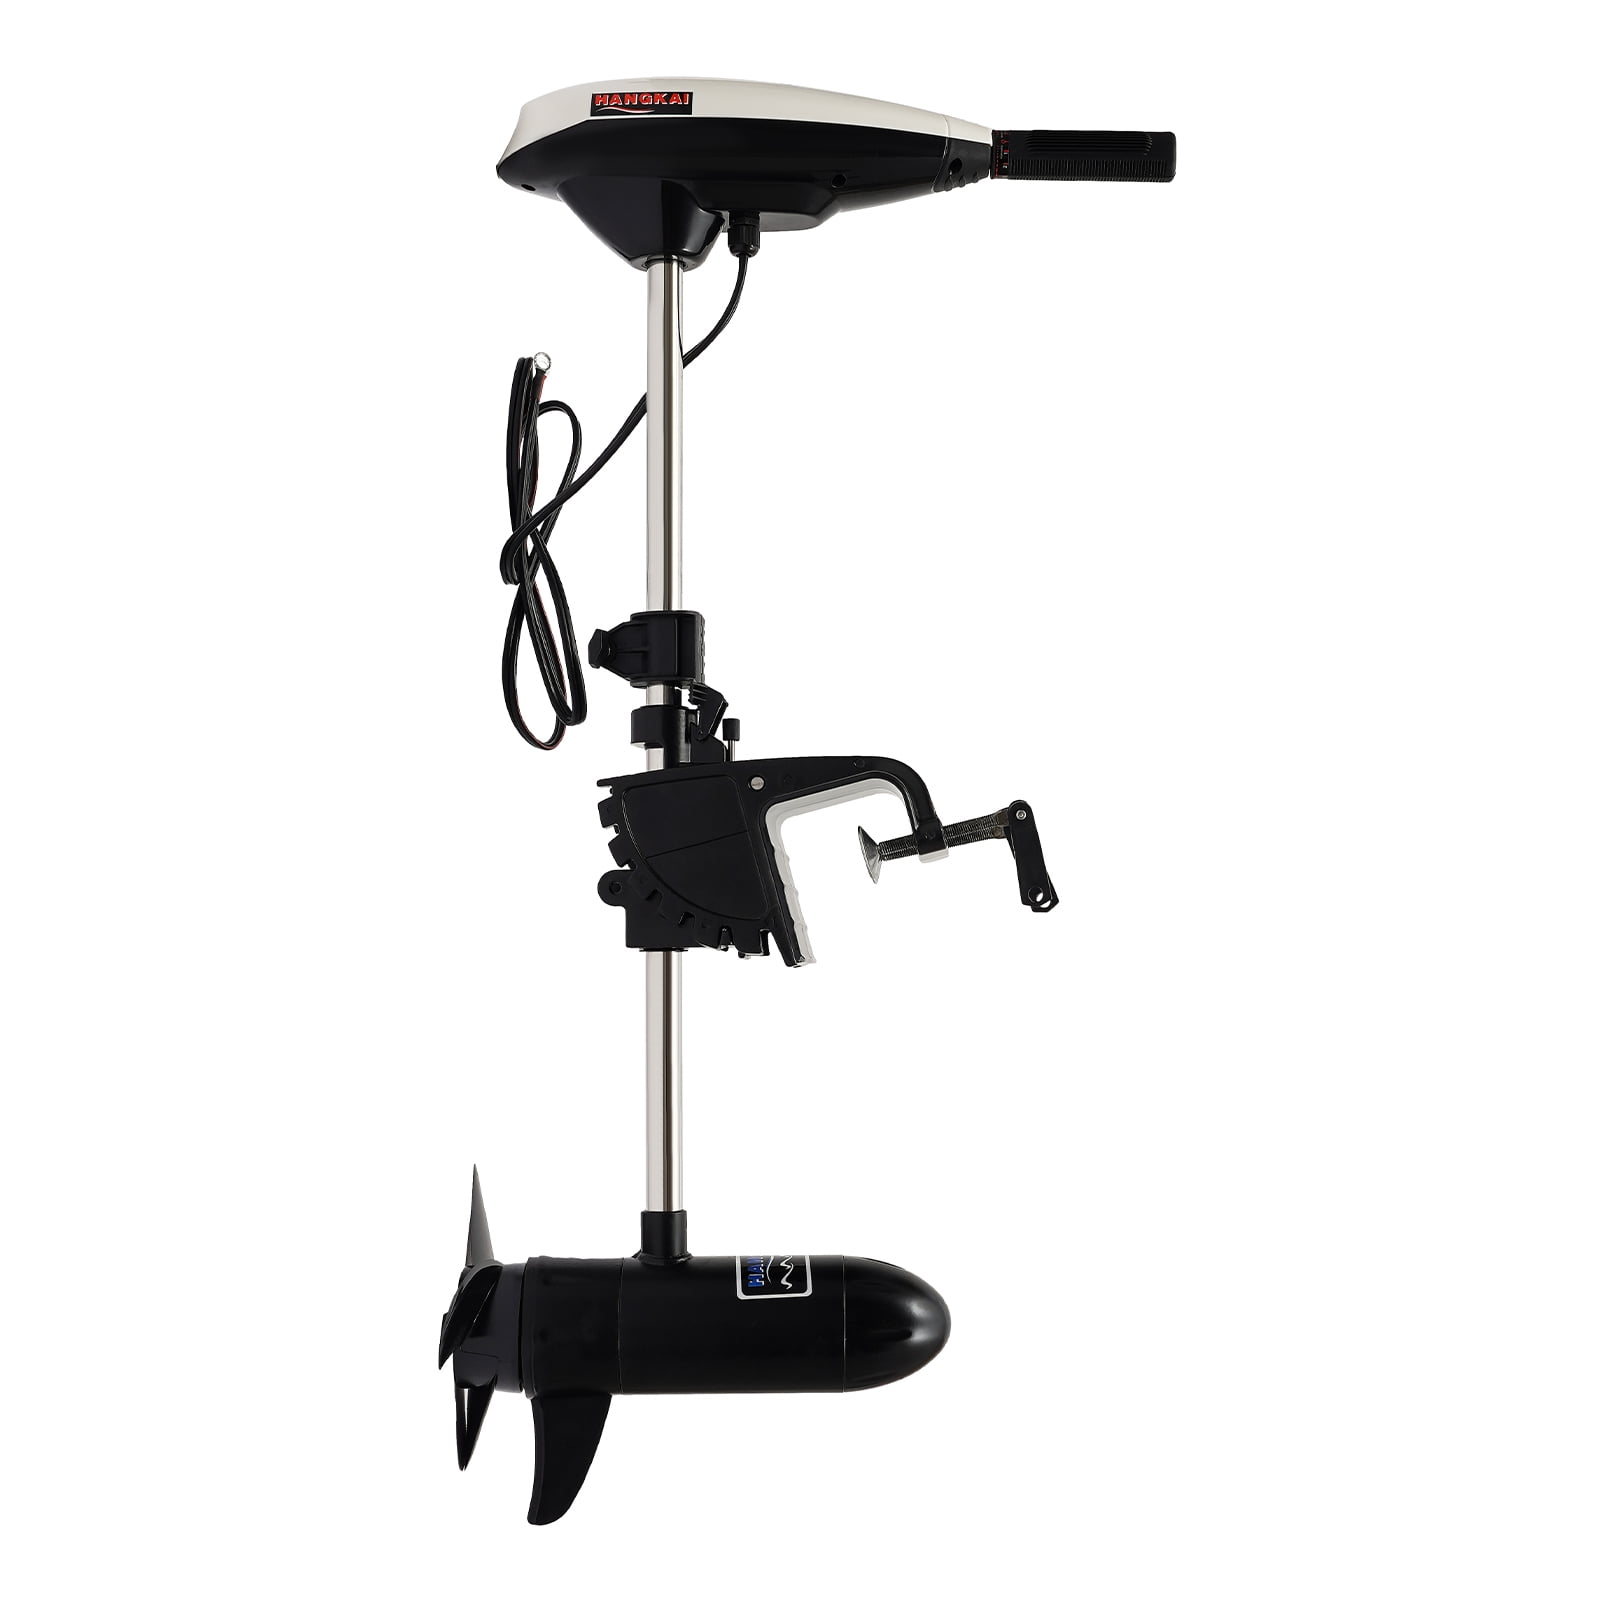 AQUOS White Haswing Cayman 12V 55LBS 54 Shaft Bow Mount Electric Trol –  AQUOSPRO